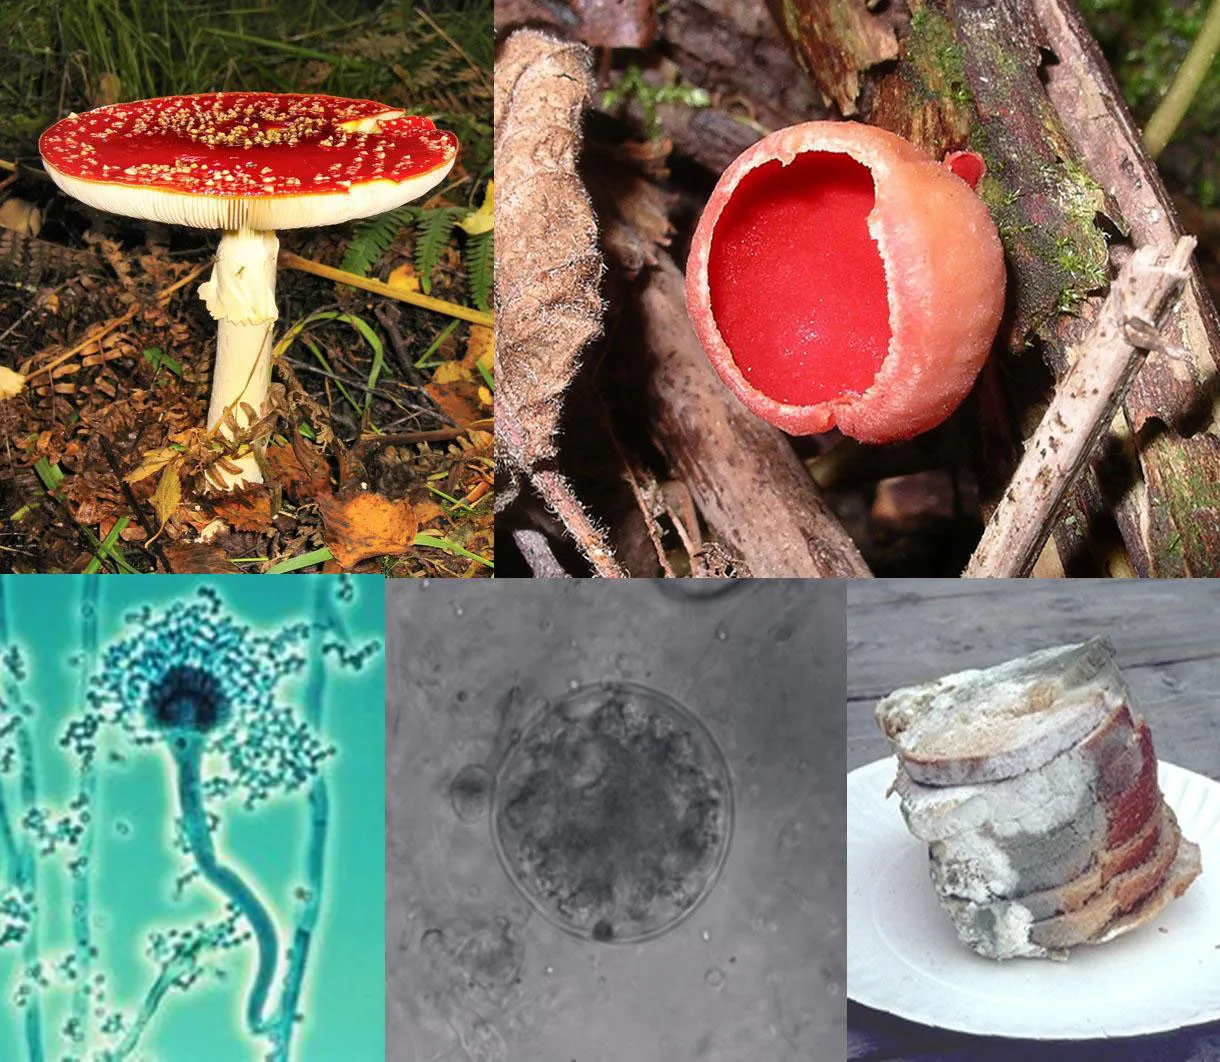 Is Fungi a Decomposer? Fungi Food Chain Position/Role